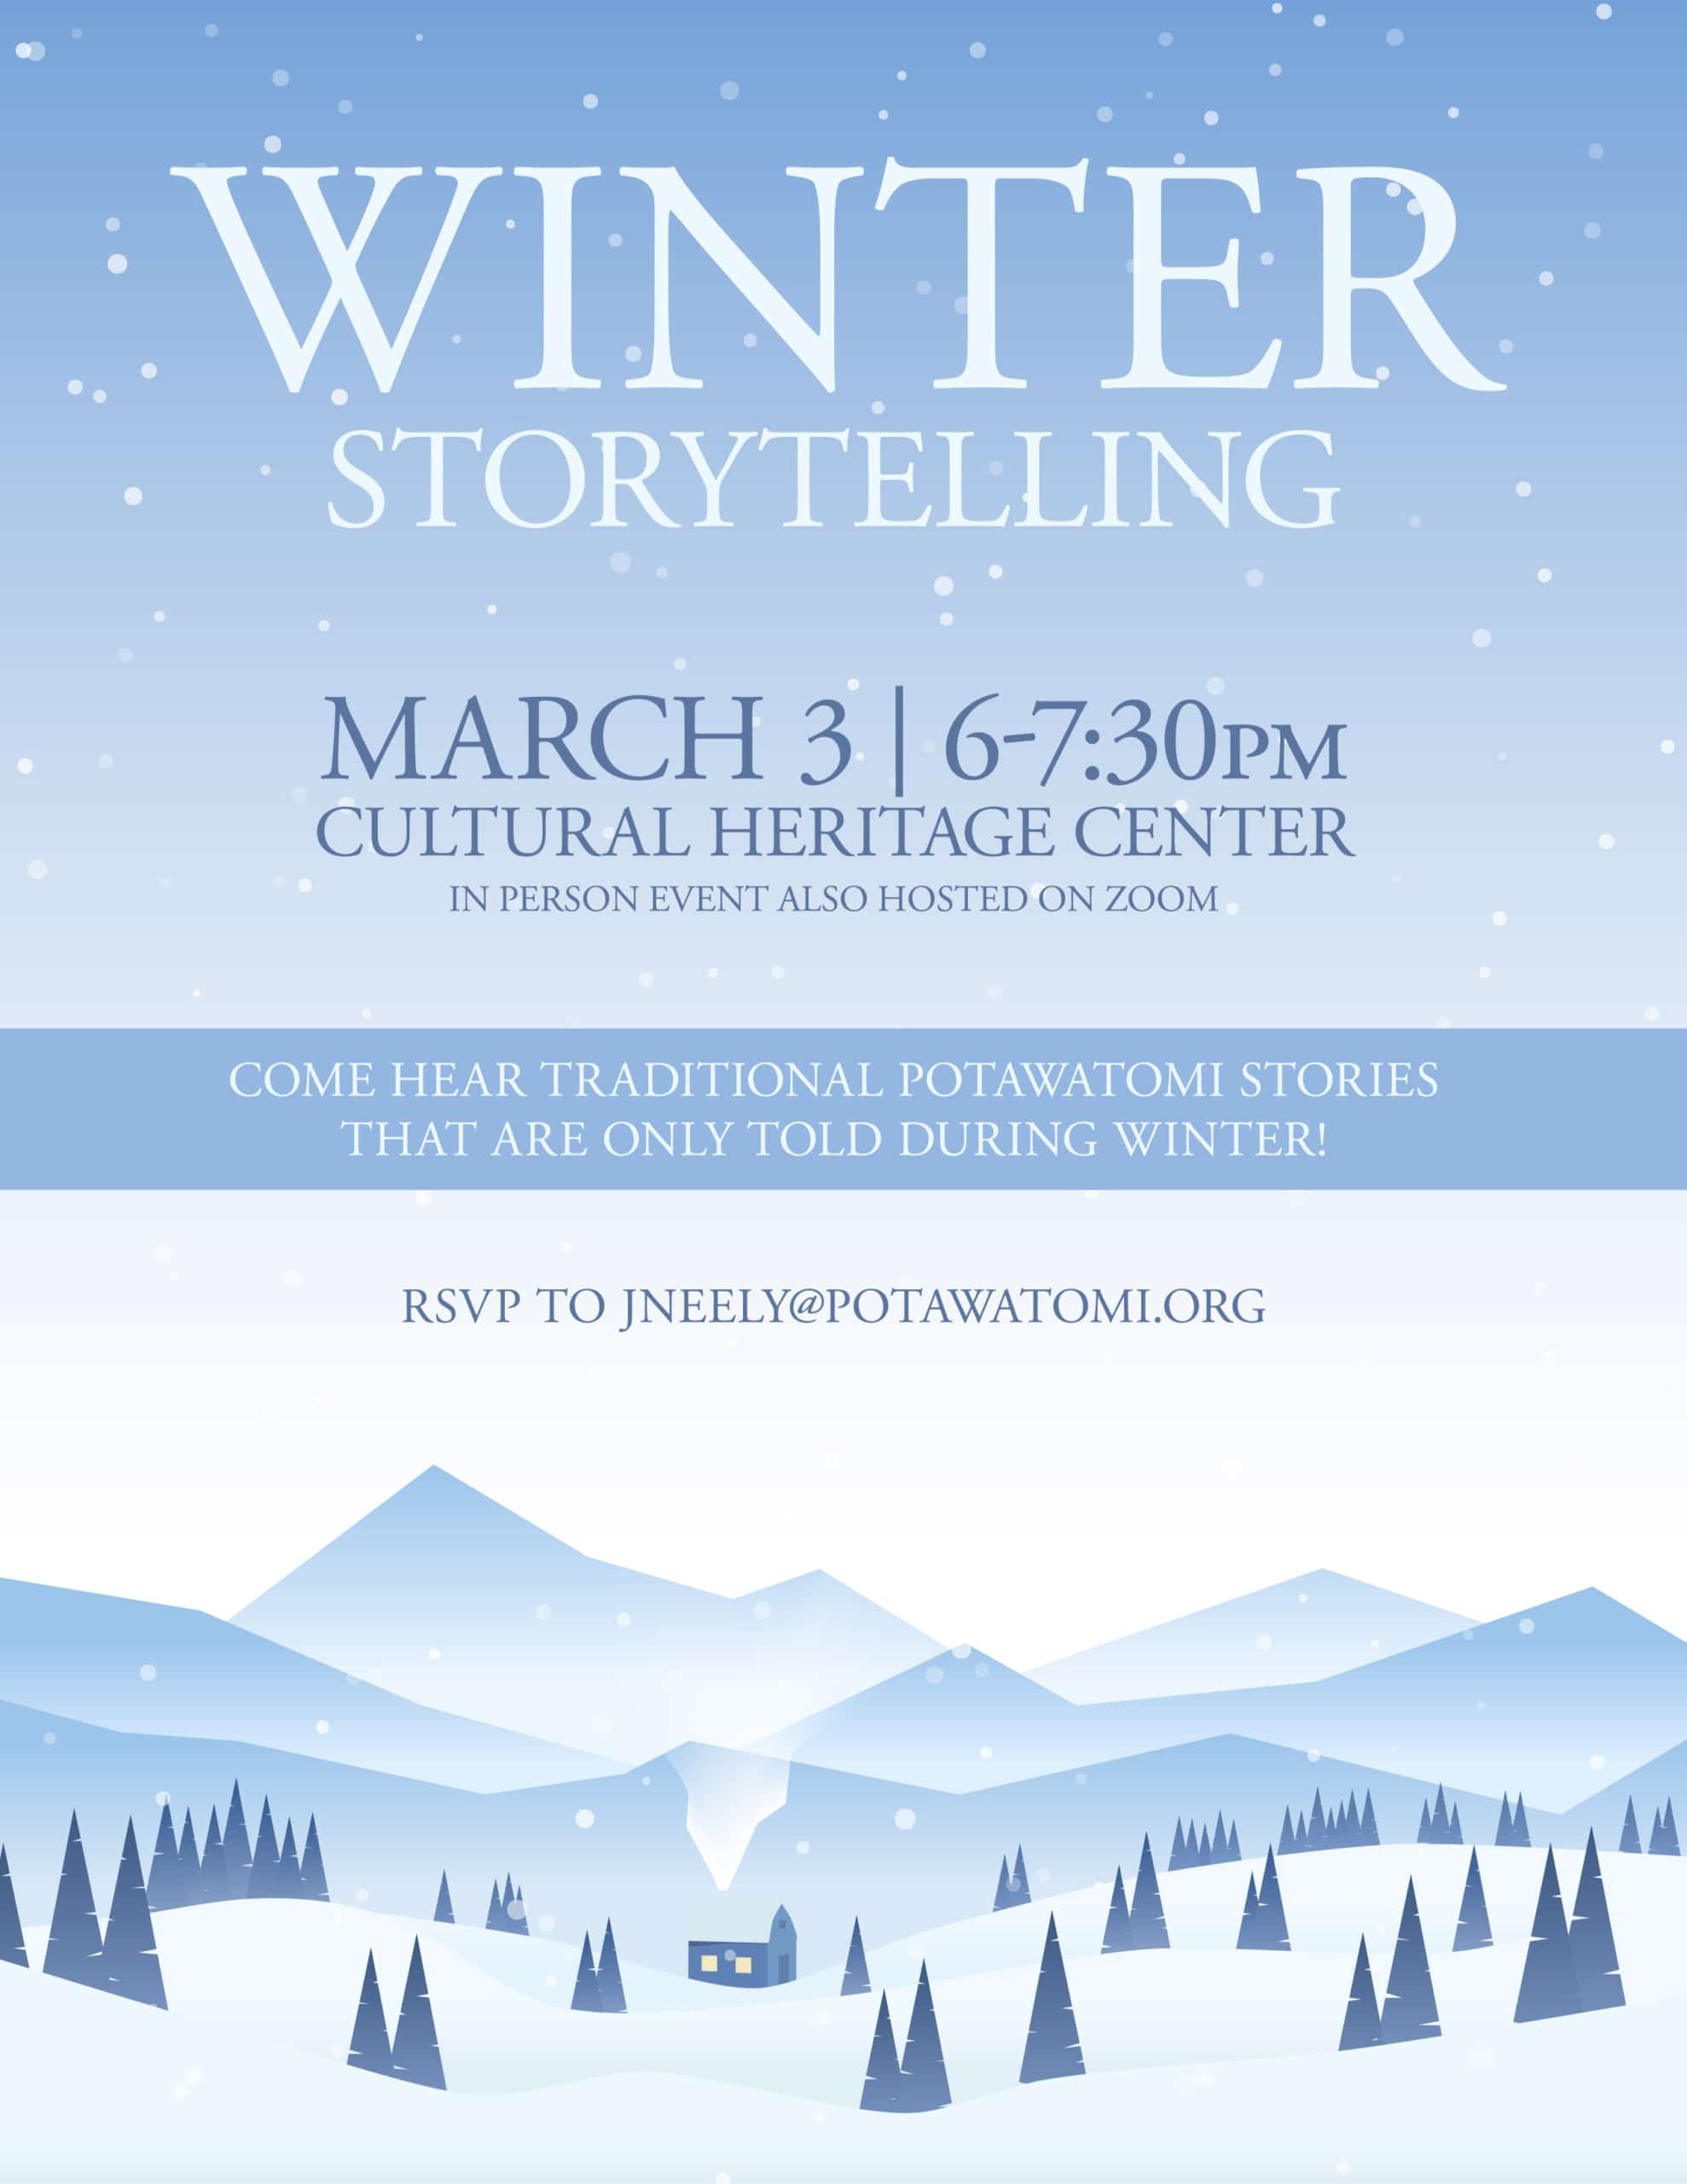 A flyer for the CPN Language Department Winter Storytelling event with abstract mountains, snow drifts and trees in varying shades of blue. Text reads: Winter Storytelling, March 3 6-7:30pm, Cultural Heritage Center. In person event also hosted on Zoom. Come hear traditional Potawatomi stories that are only told during winter! RSVP to jneely@potawatomi.org.